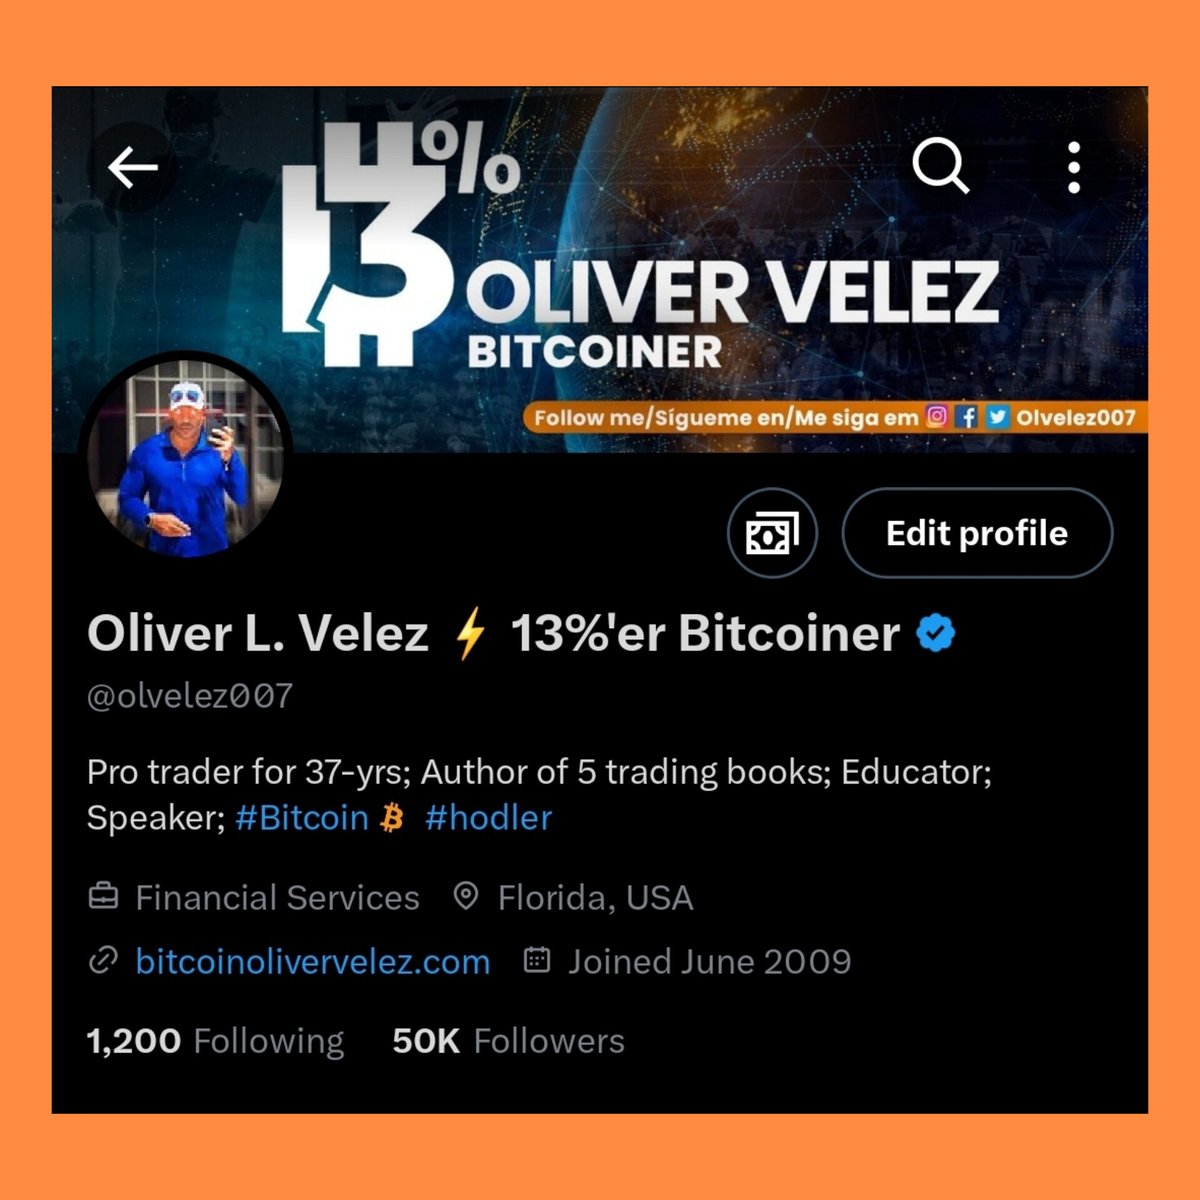 50k followers! 🤯 Even though I will be leaving you at #Bitcoin    $100k to focus on other things, it does not mean I don't appreciate the support. I'm flabbergasted by your generosity. Thank you. 🙏🏽 #stackharder